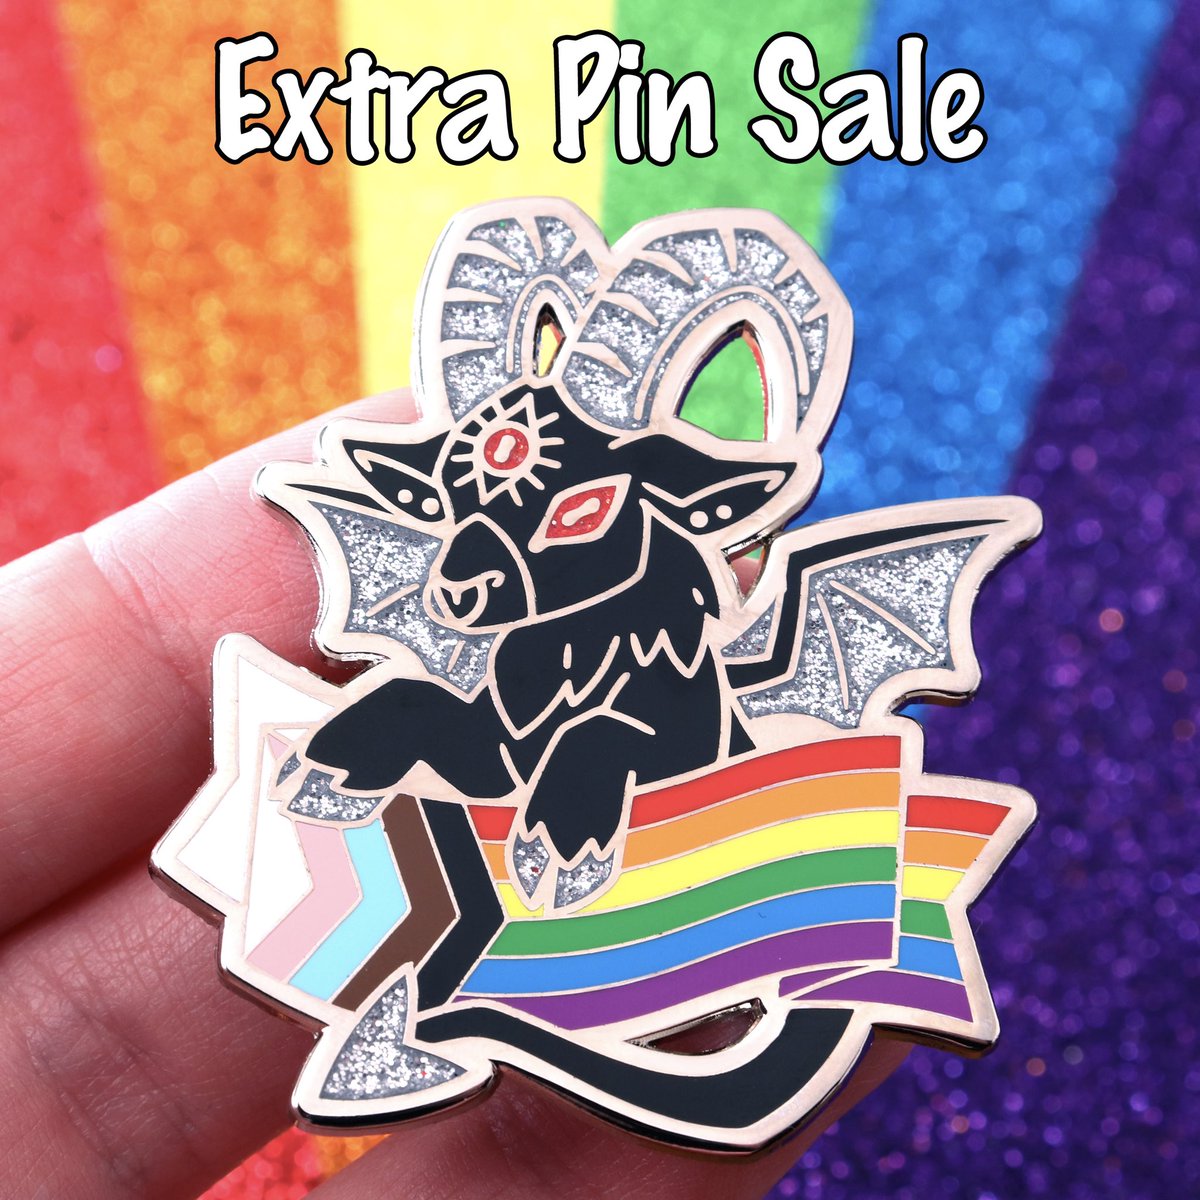 This Sunday 5/5 at 1 PM PST, we will be dropping the extra Pride Demon Pins in our shop! ✨🏳️‍🌈 This drop will include A grade and 2nds We also added an intersex pin that was not originally in the Kickstarter! Please keep in mind that some pins have extremely limited quantities